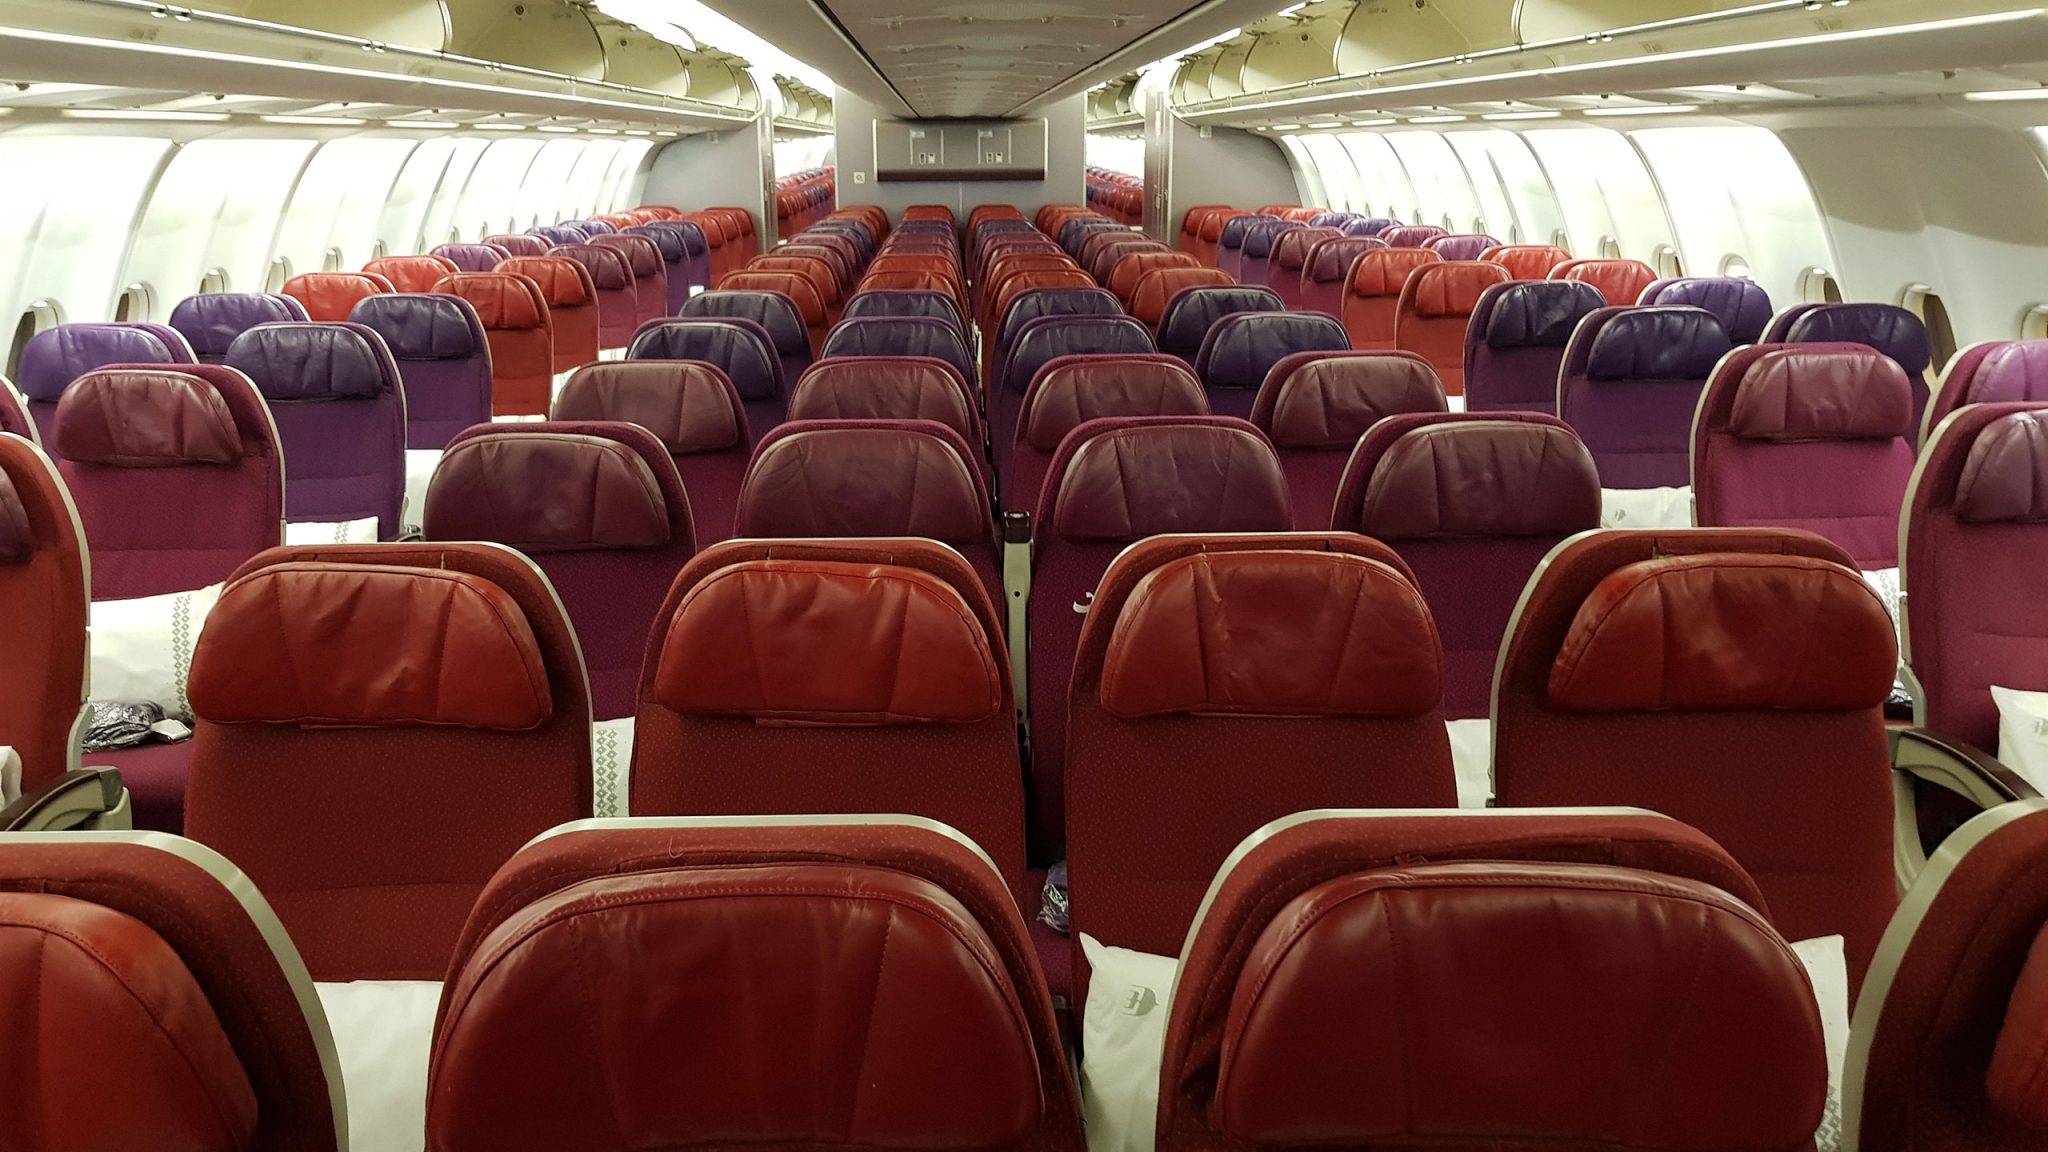 Malaysia Airlines Airbus A330-300 cabin